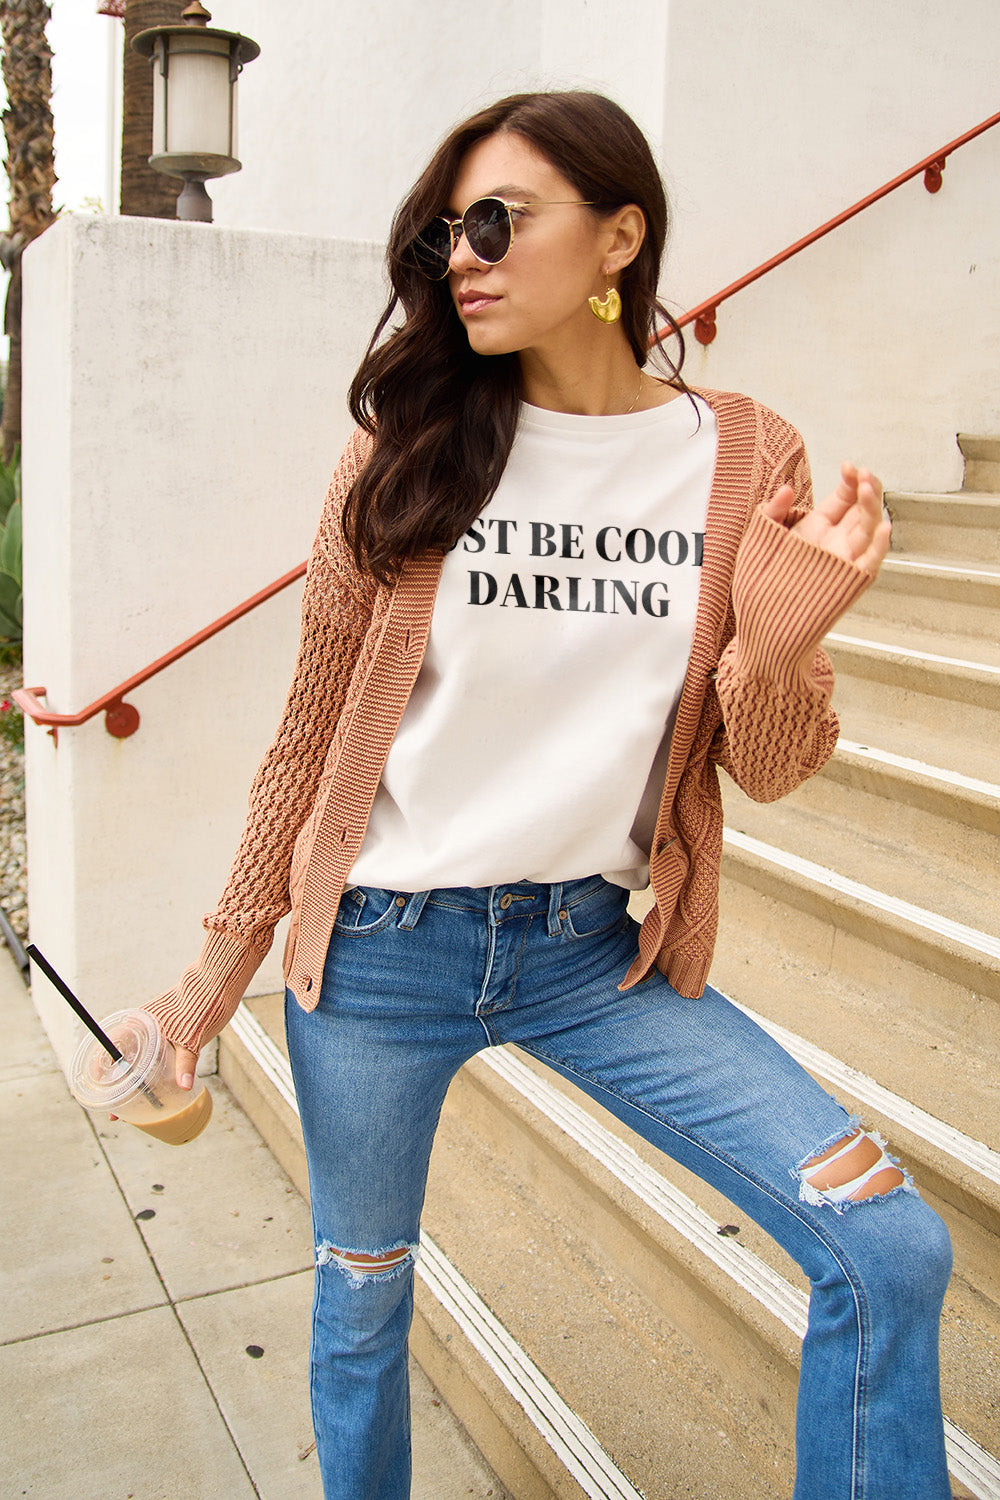 JUST BE COOL DARLING Short Sleeve T-Shirt - Sydney So Sweet